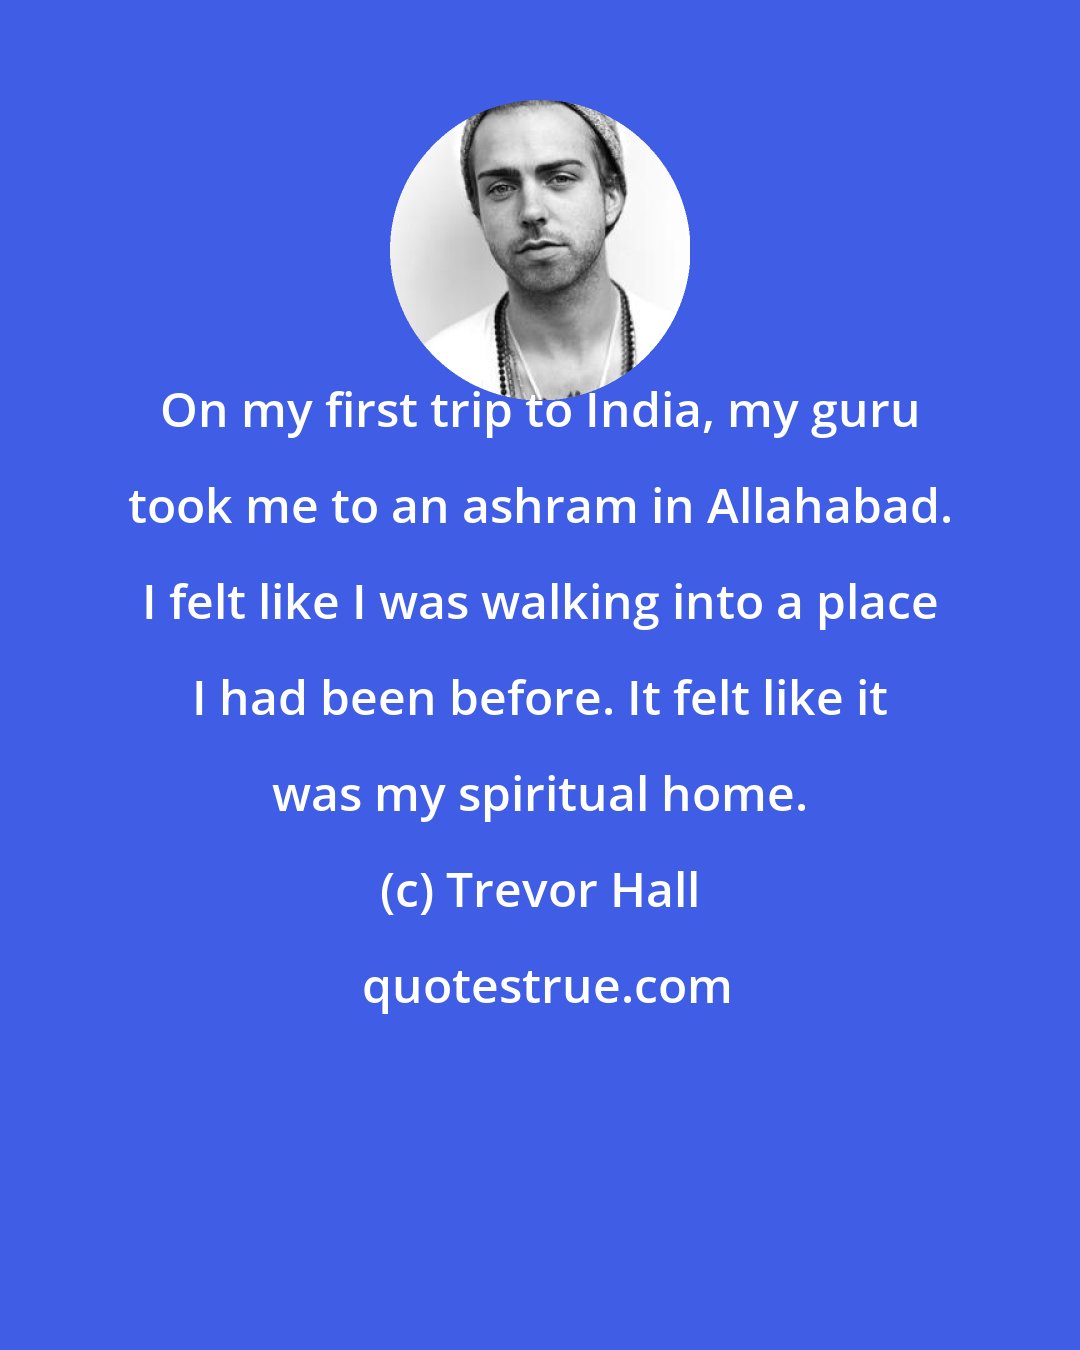 Trevor Hall: On my first trip to India, my guru took me to an ashram in Allahabad. I felt like I was walking into a place I had been before. It felt like it was my spiritual home.